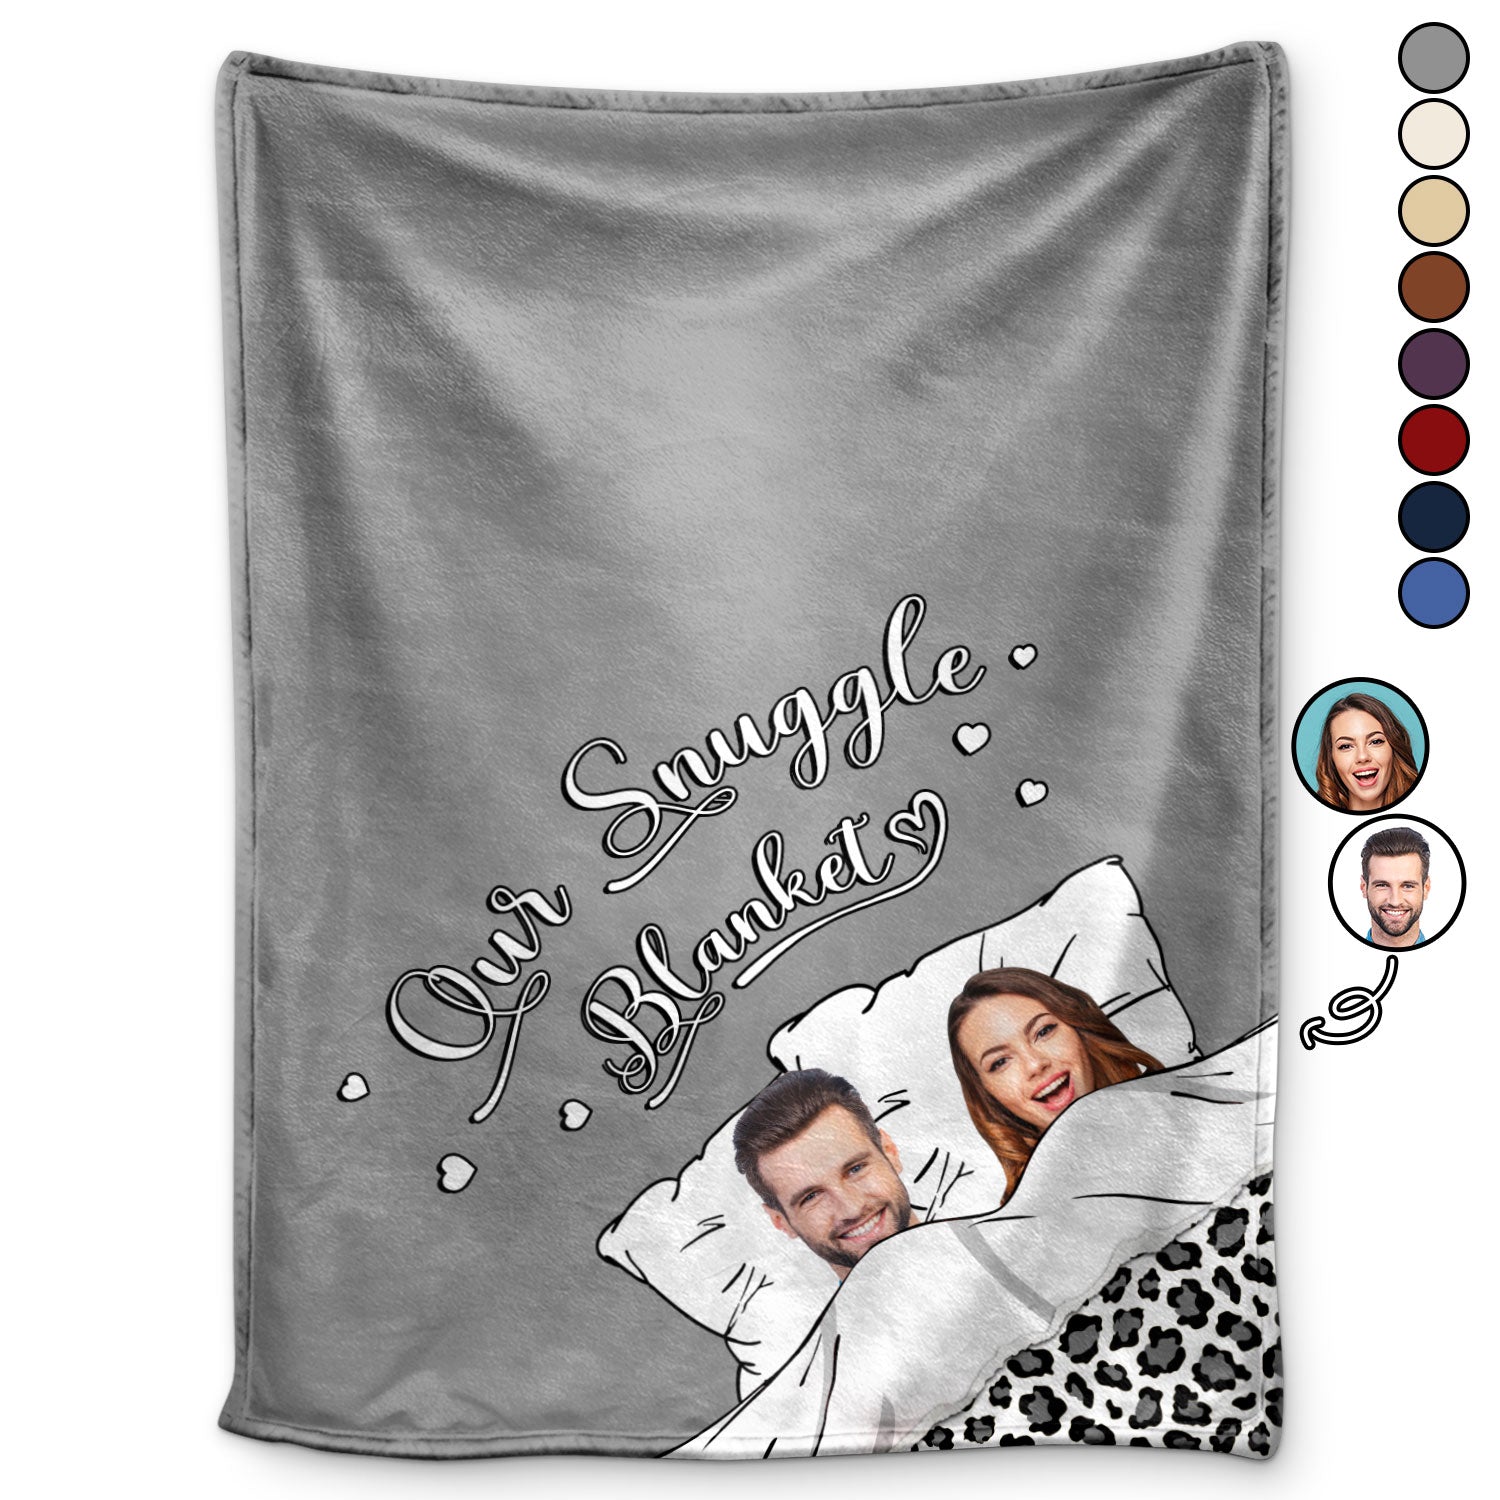 Custom Photo Our Snuggle Blanket - Birthday, Anniversary, Funny Gift For Spouse, Husband, Wife, Couple - Personalized Fleece Blanket